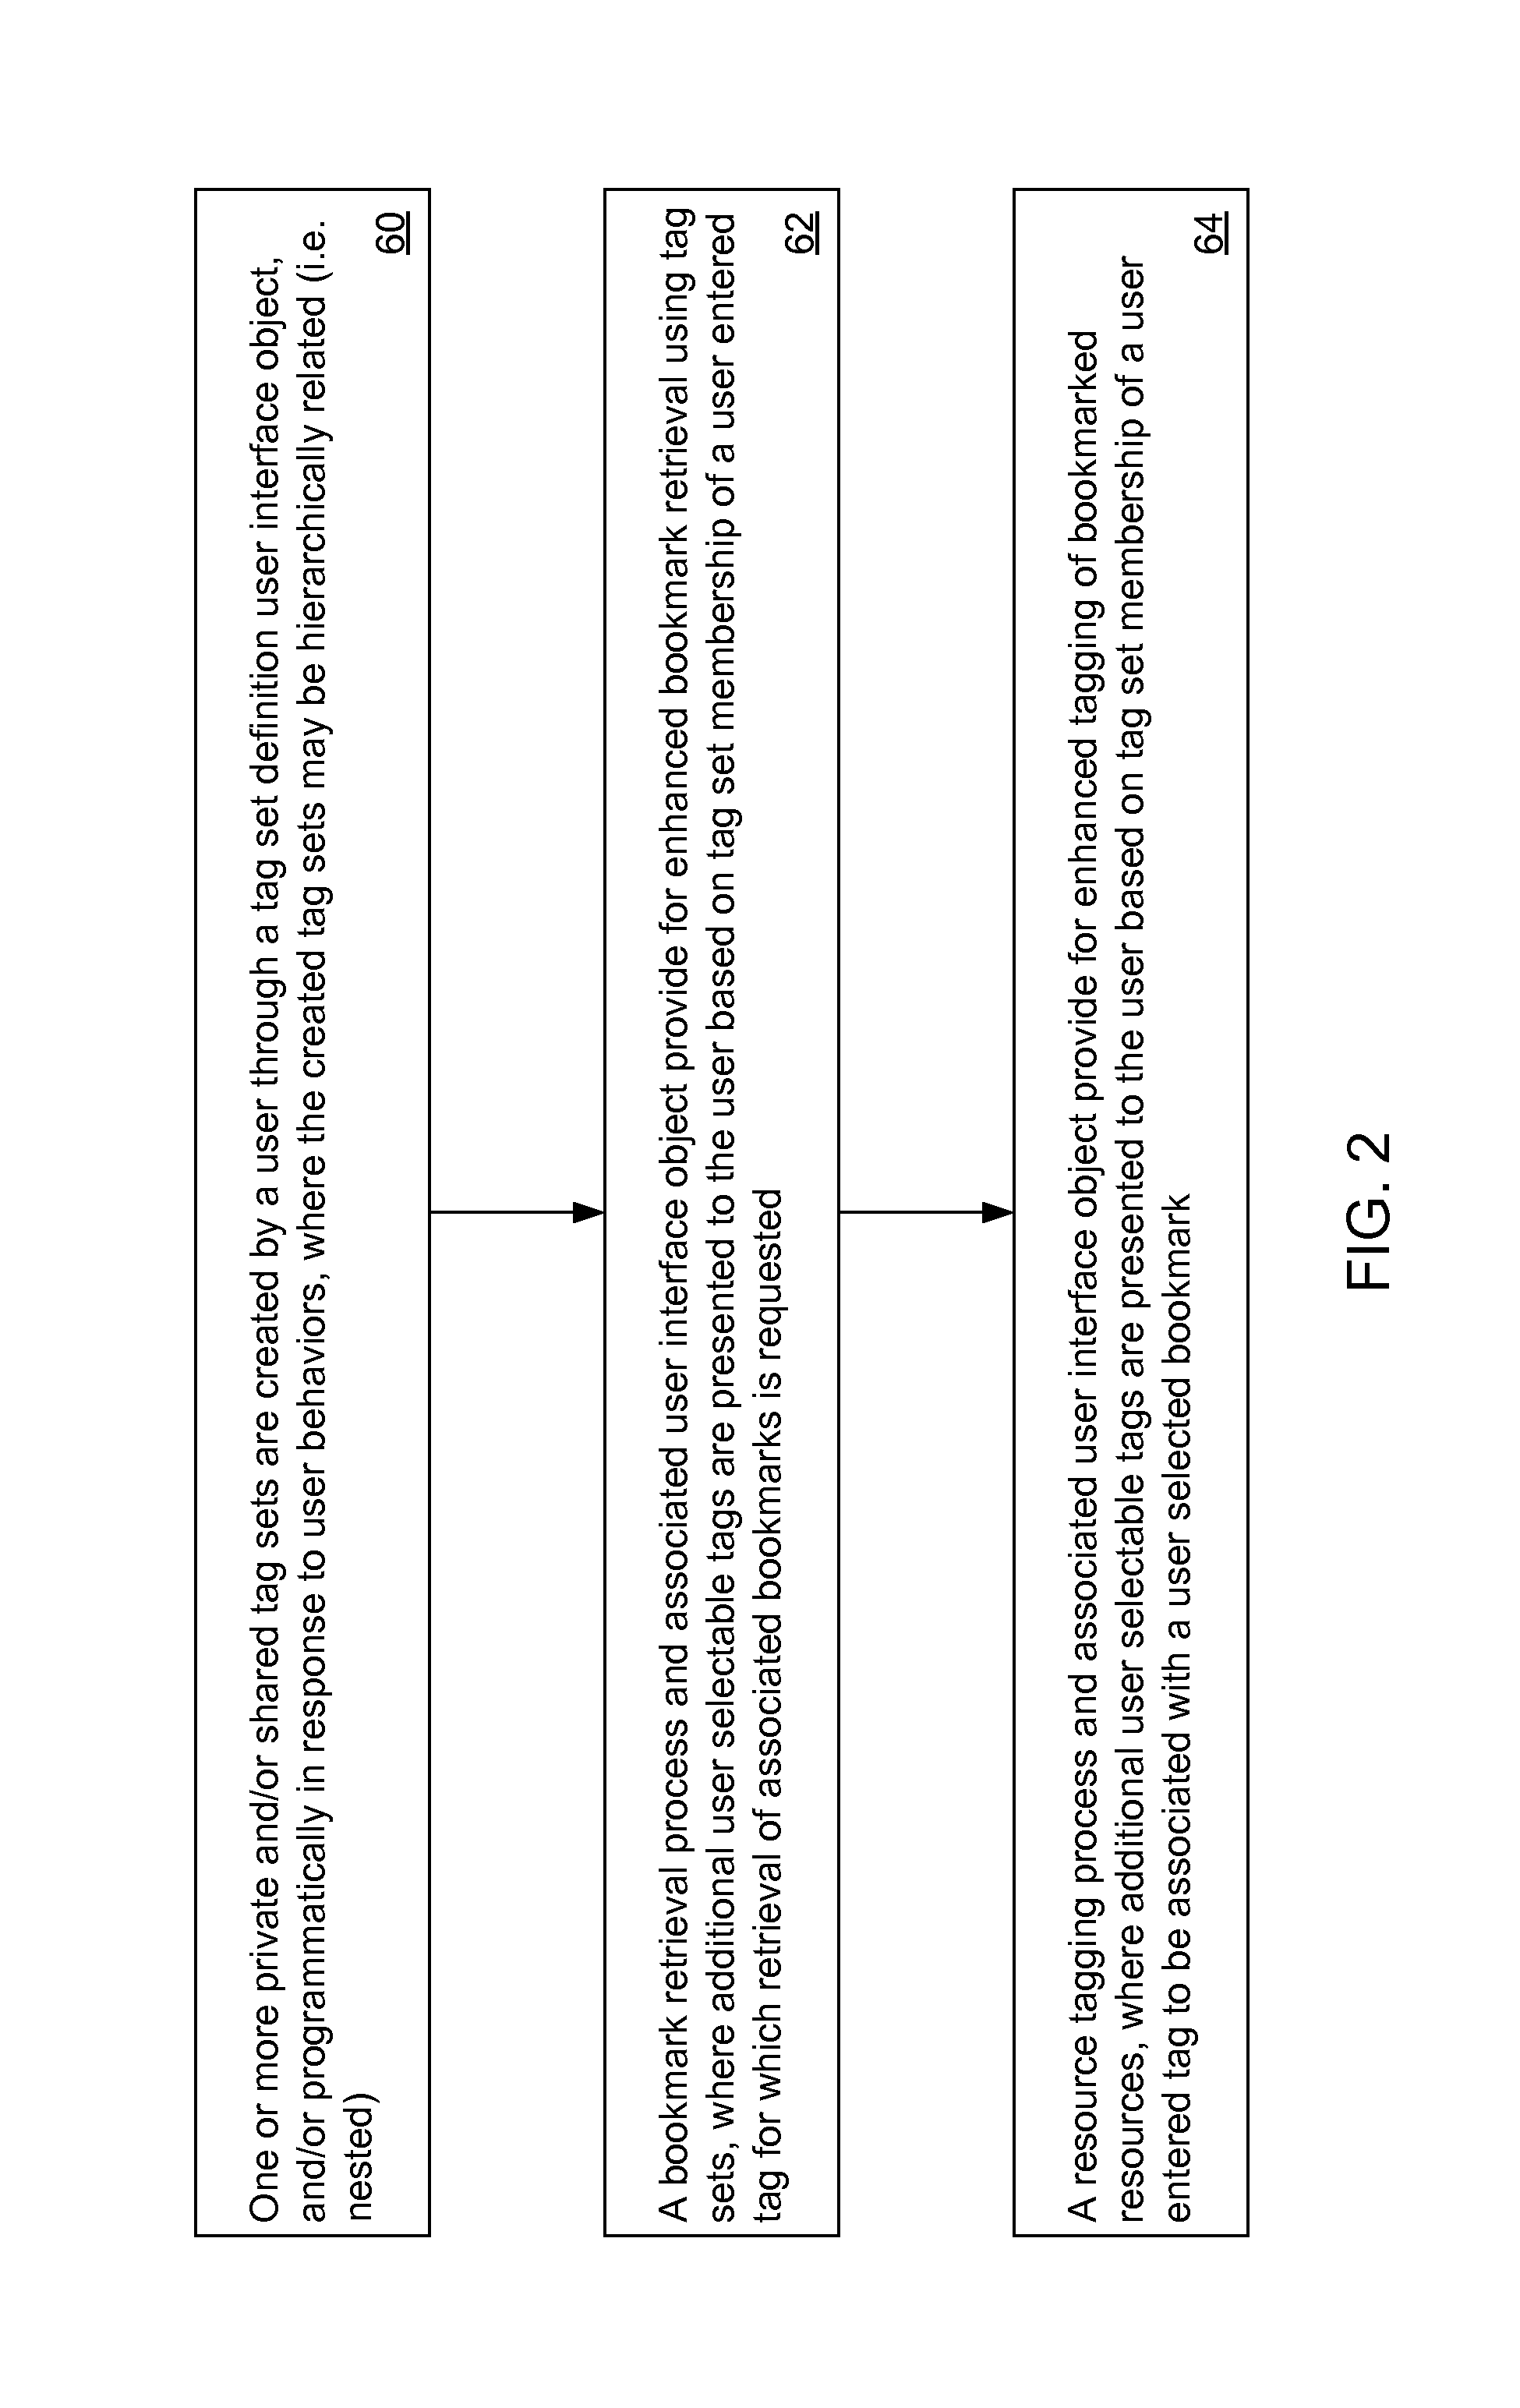 Method and sytem for providing collaborative tag sets to assist in the use and navigation of a folksonomy